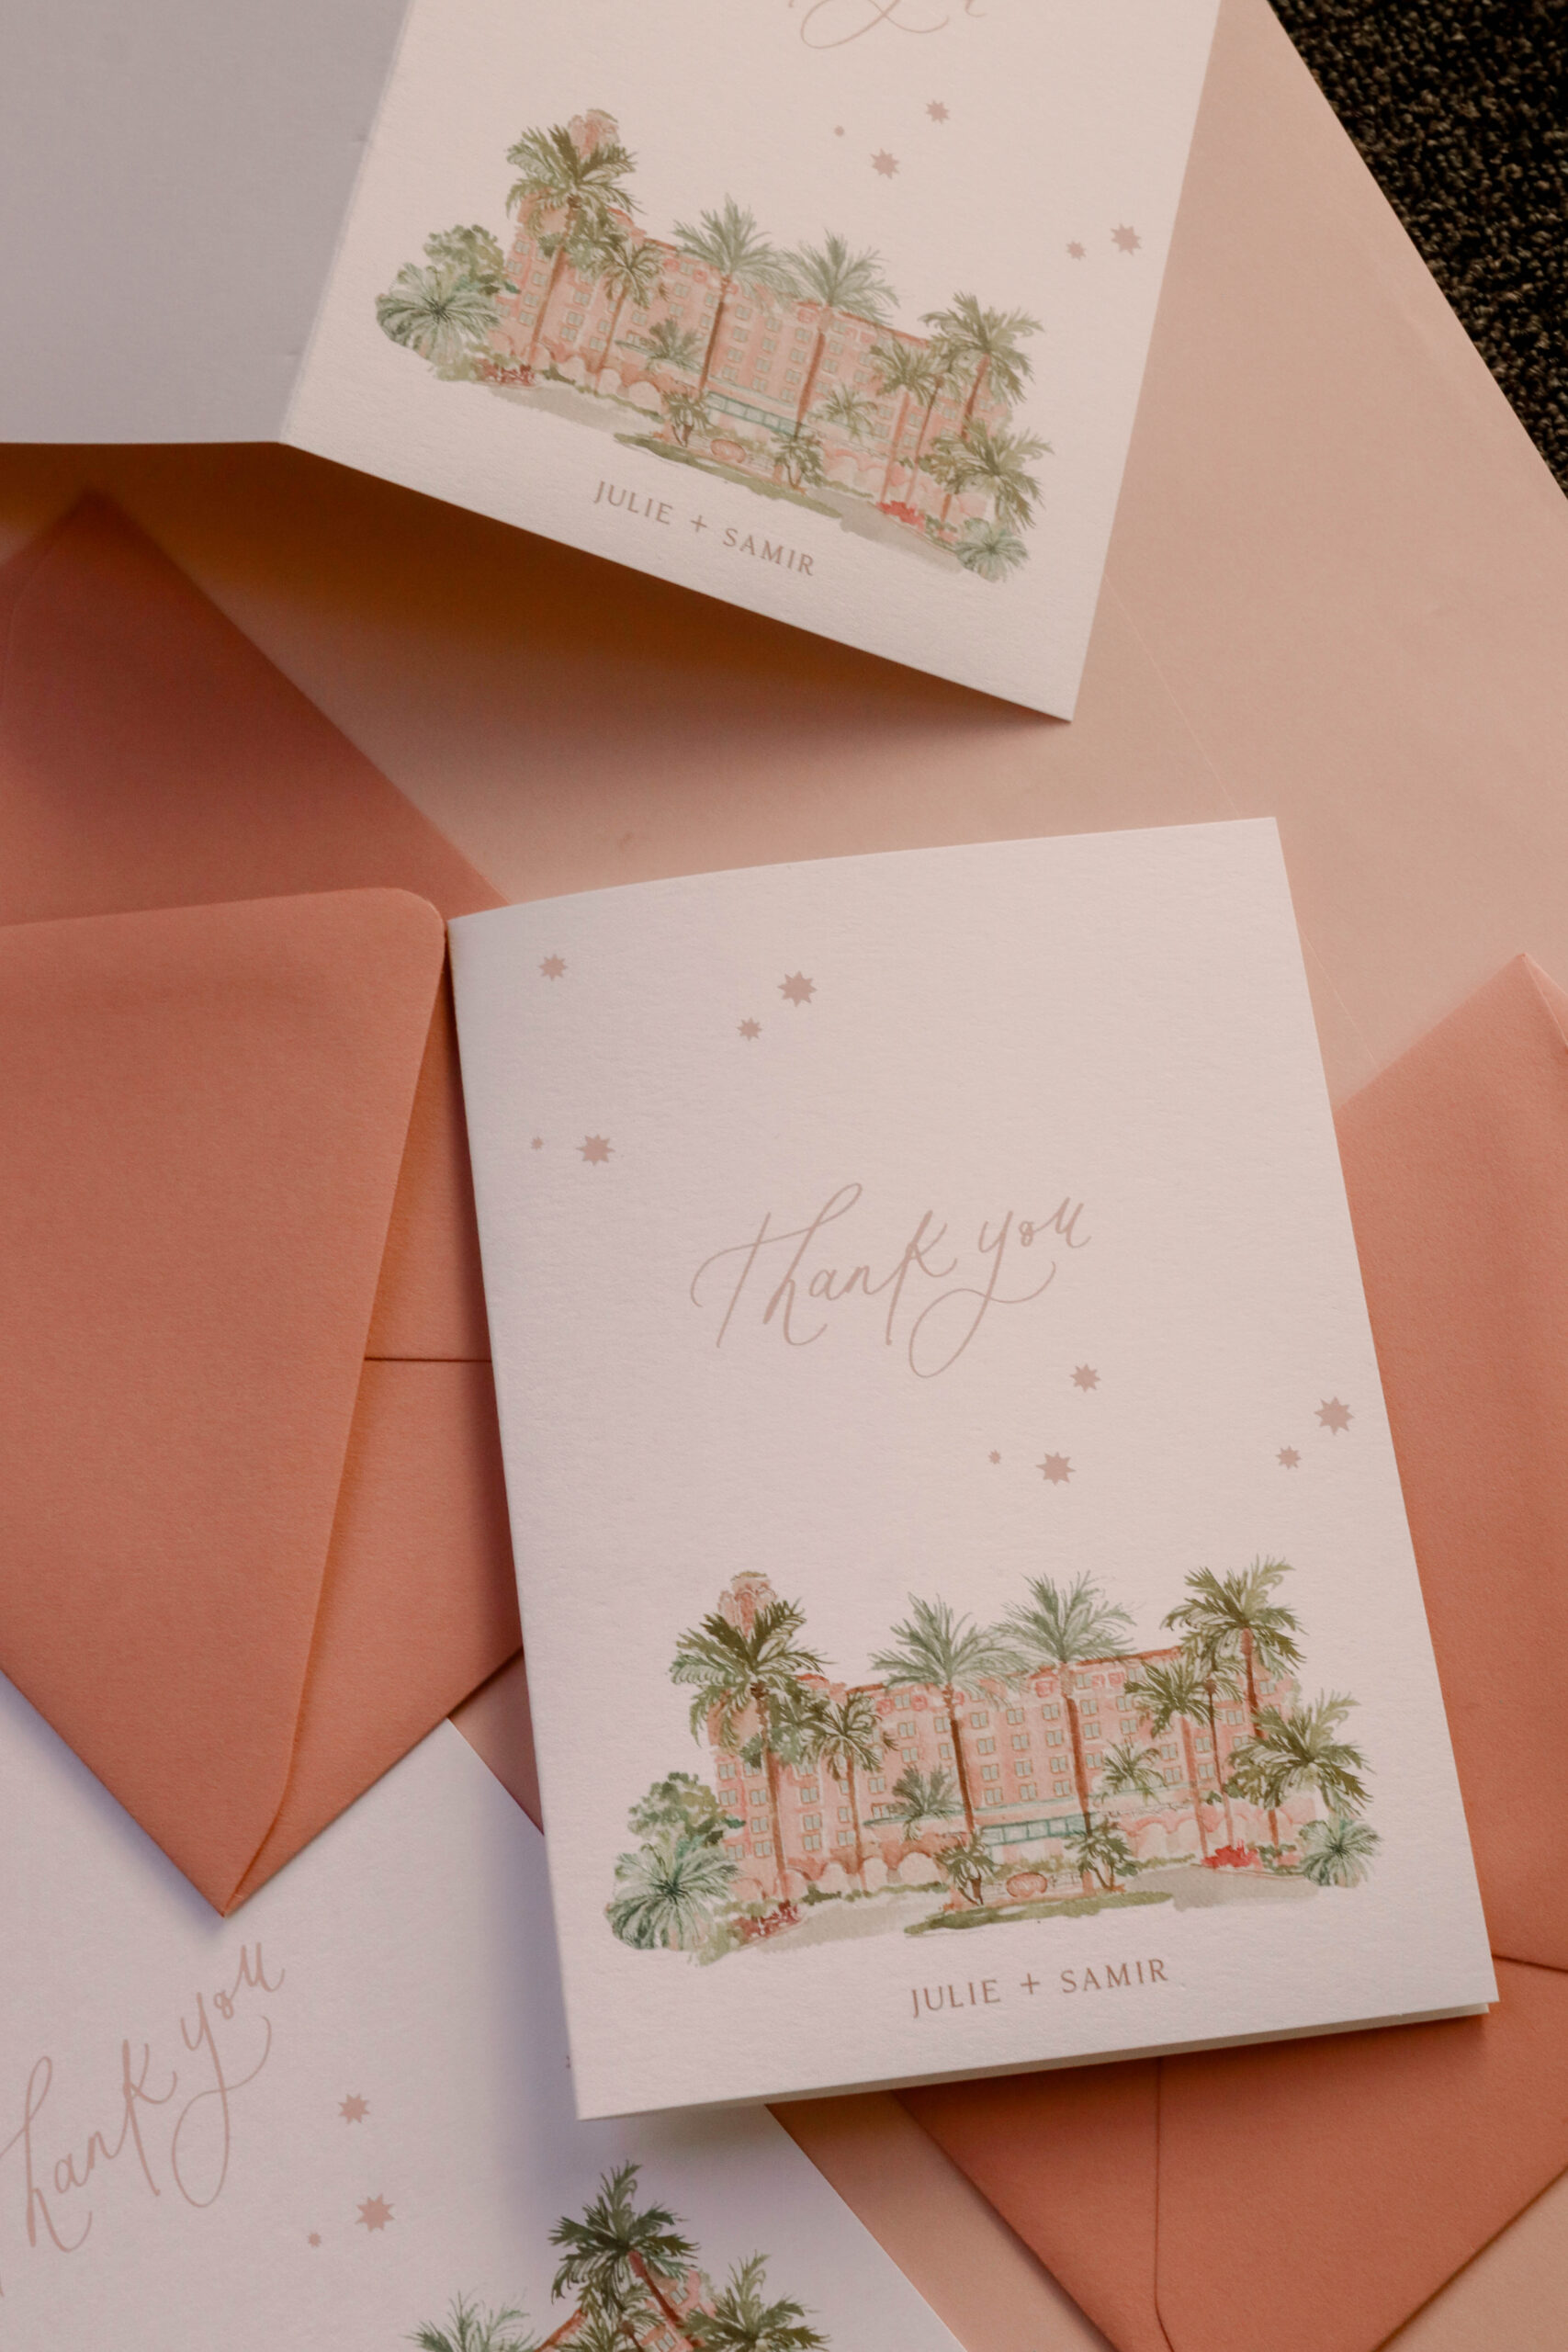 Thank you cards with venue illustration